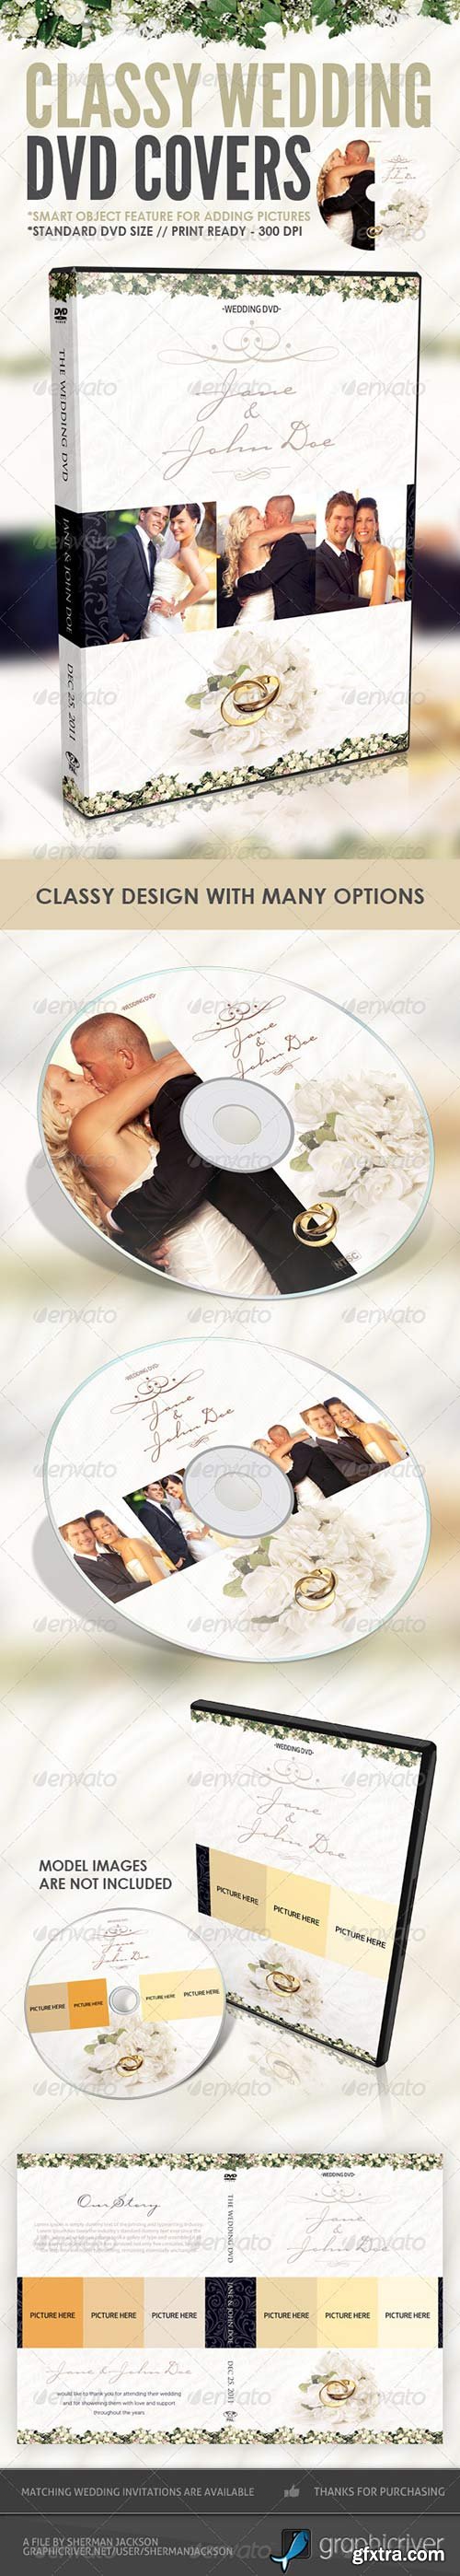 GraphicRiver - Classy Wedding DVD Covers 1100835